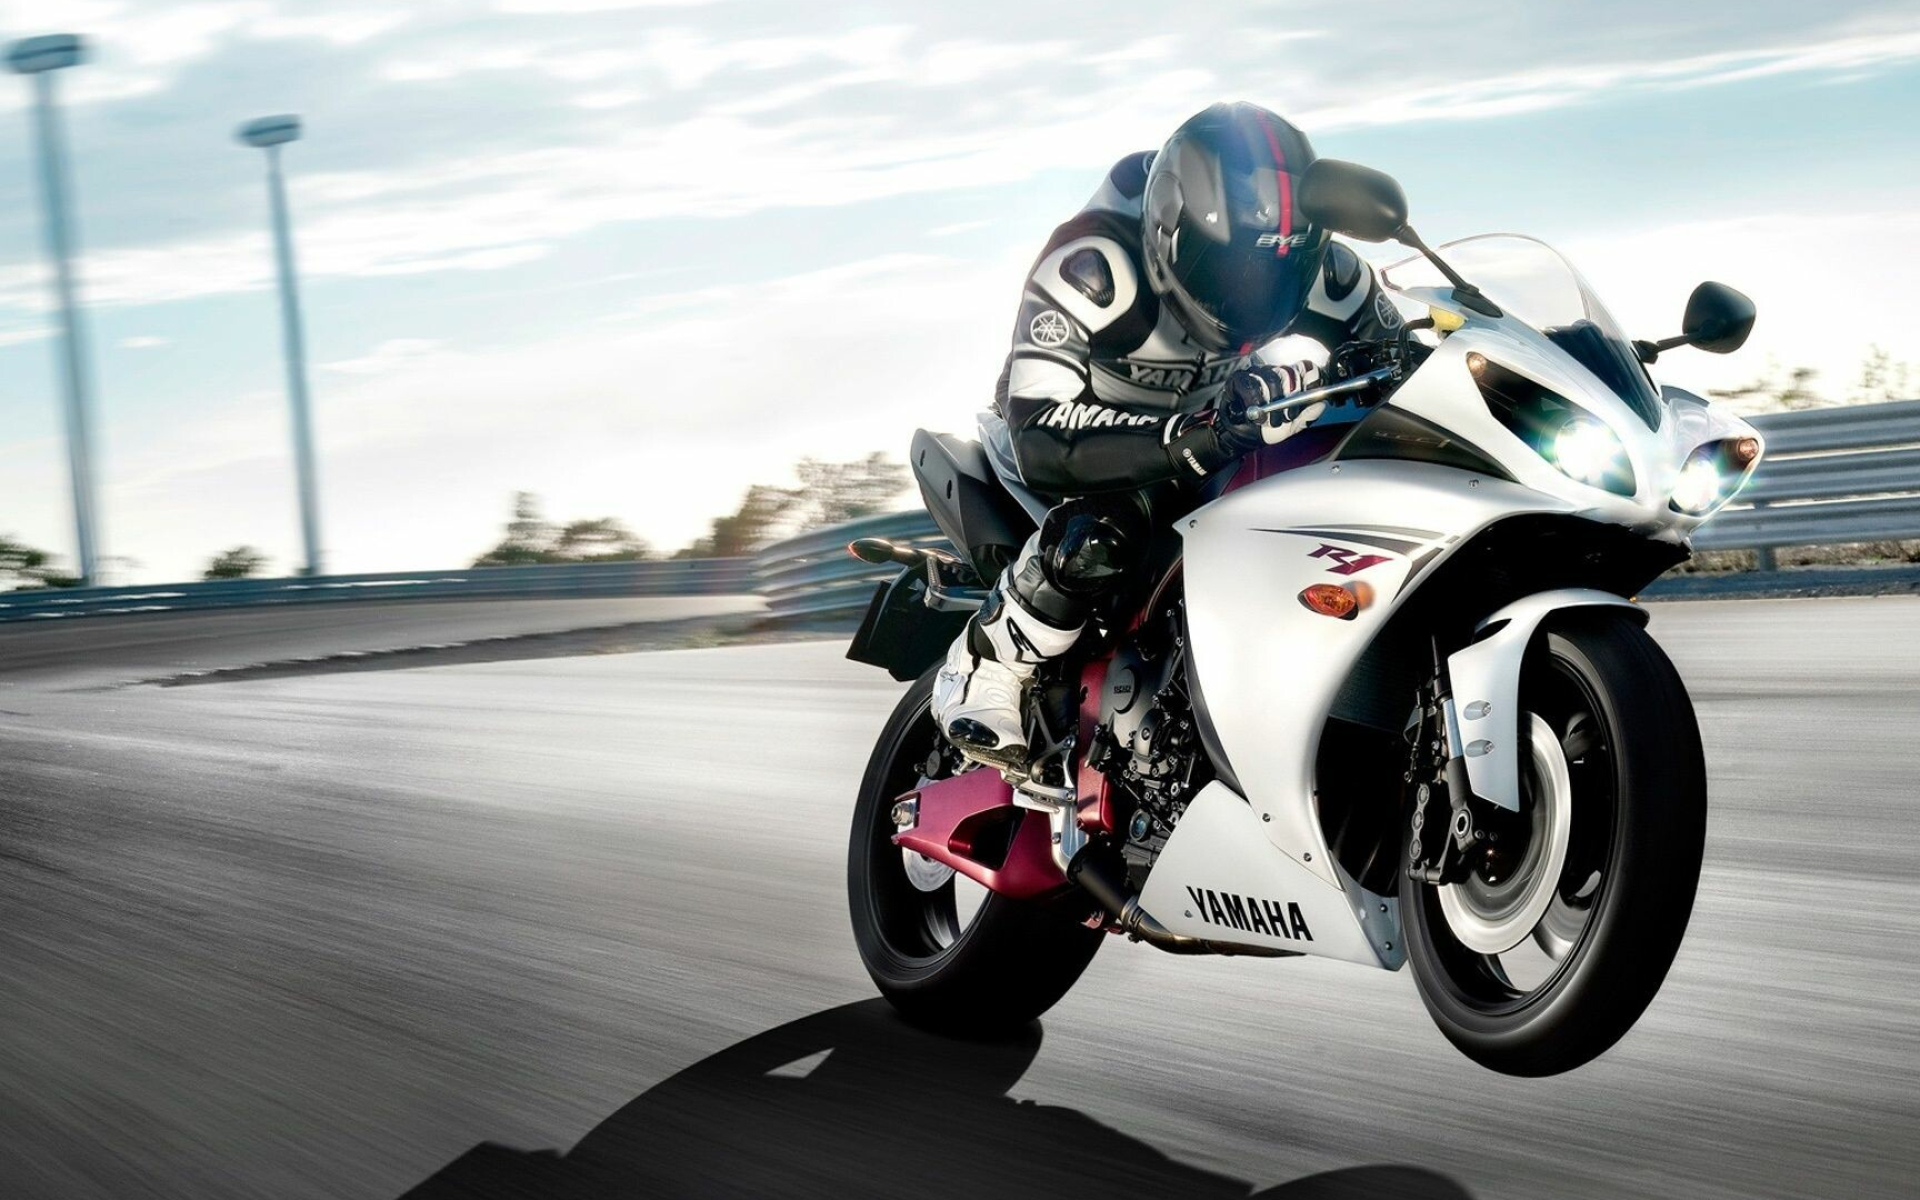 Motorbike wallpapers, Speed and style, Thrilling adventures, Bike enthusiast's passion, 1920x1200 HD Desktop